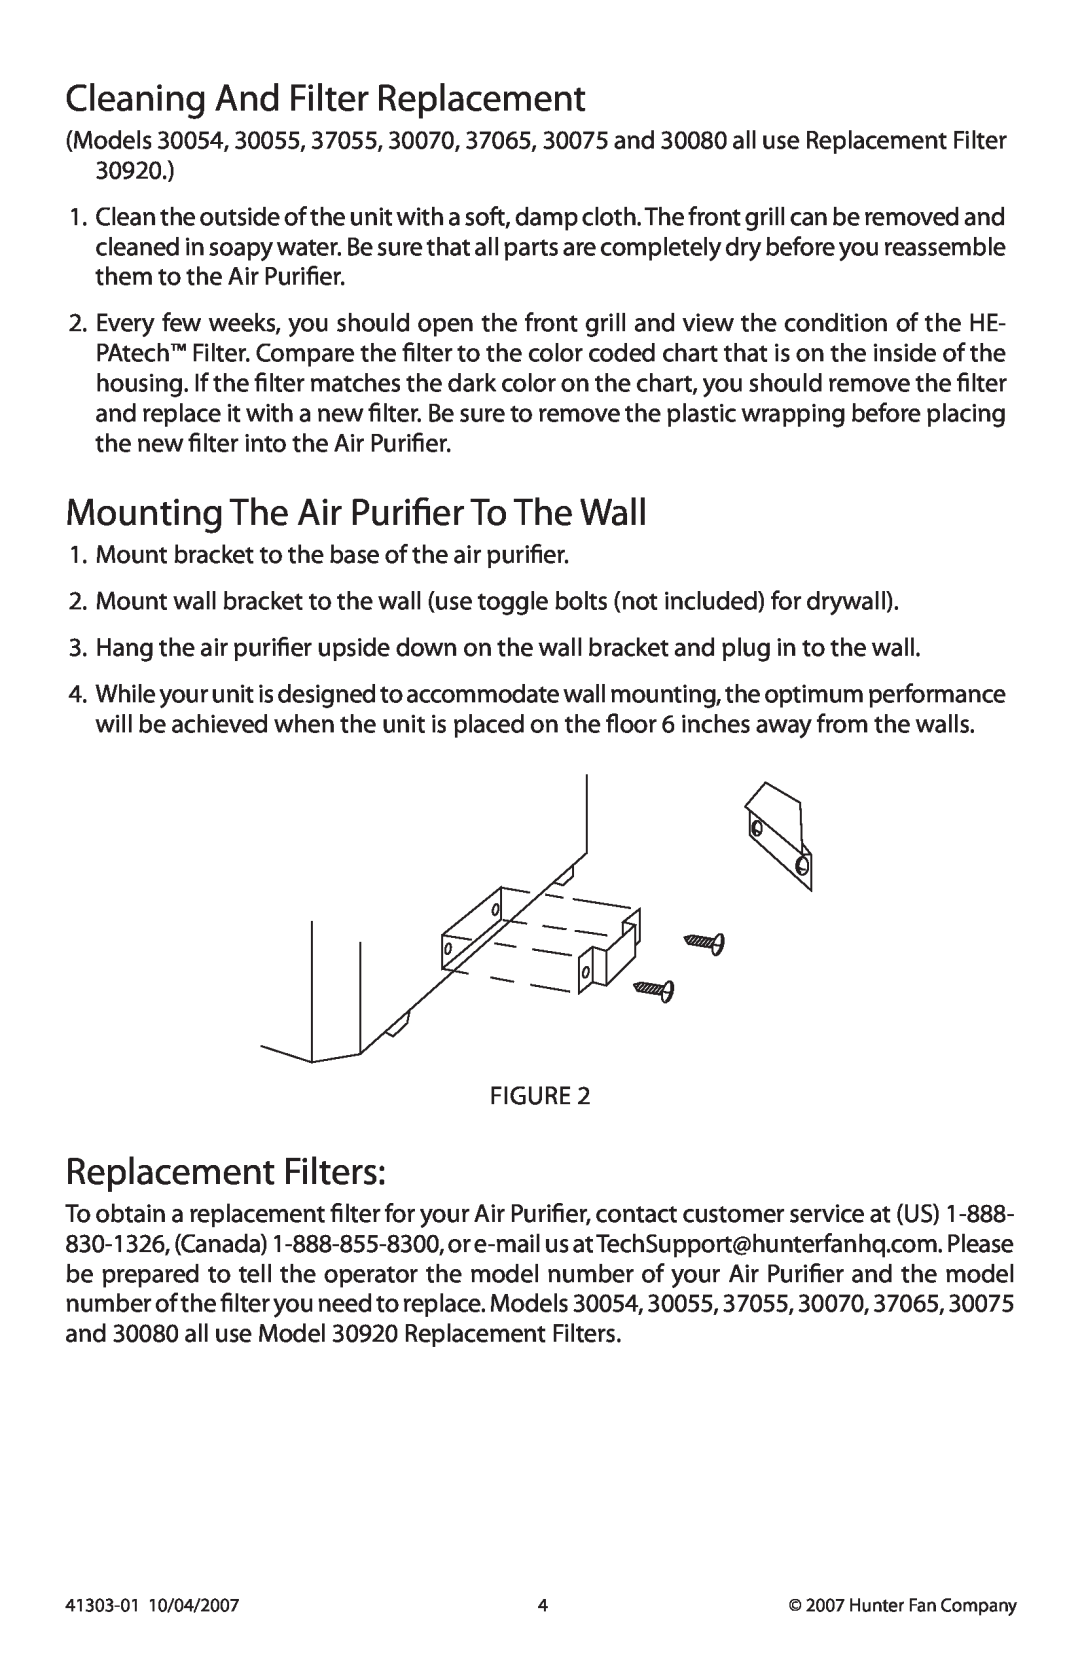 Hunter Fan 30070, 37065, 37055 Cleaning And Filter Replacement, Mounting The Air Purifier To The Wall, Replacement Filters 